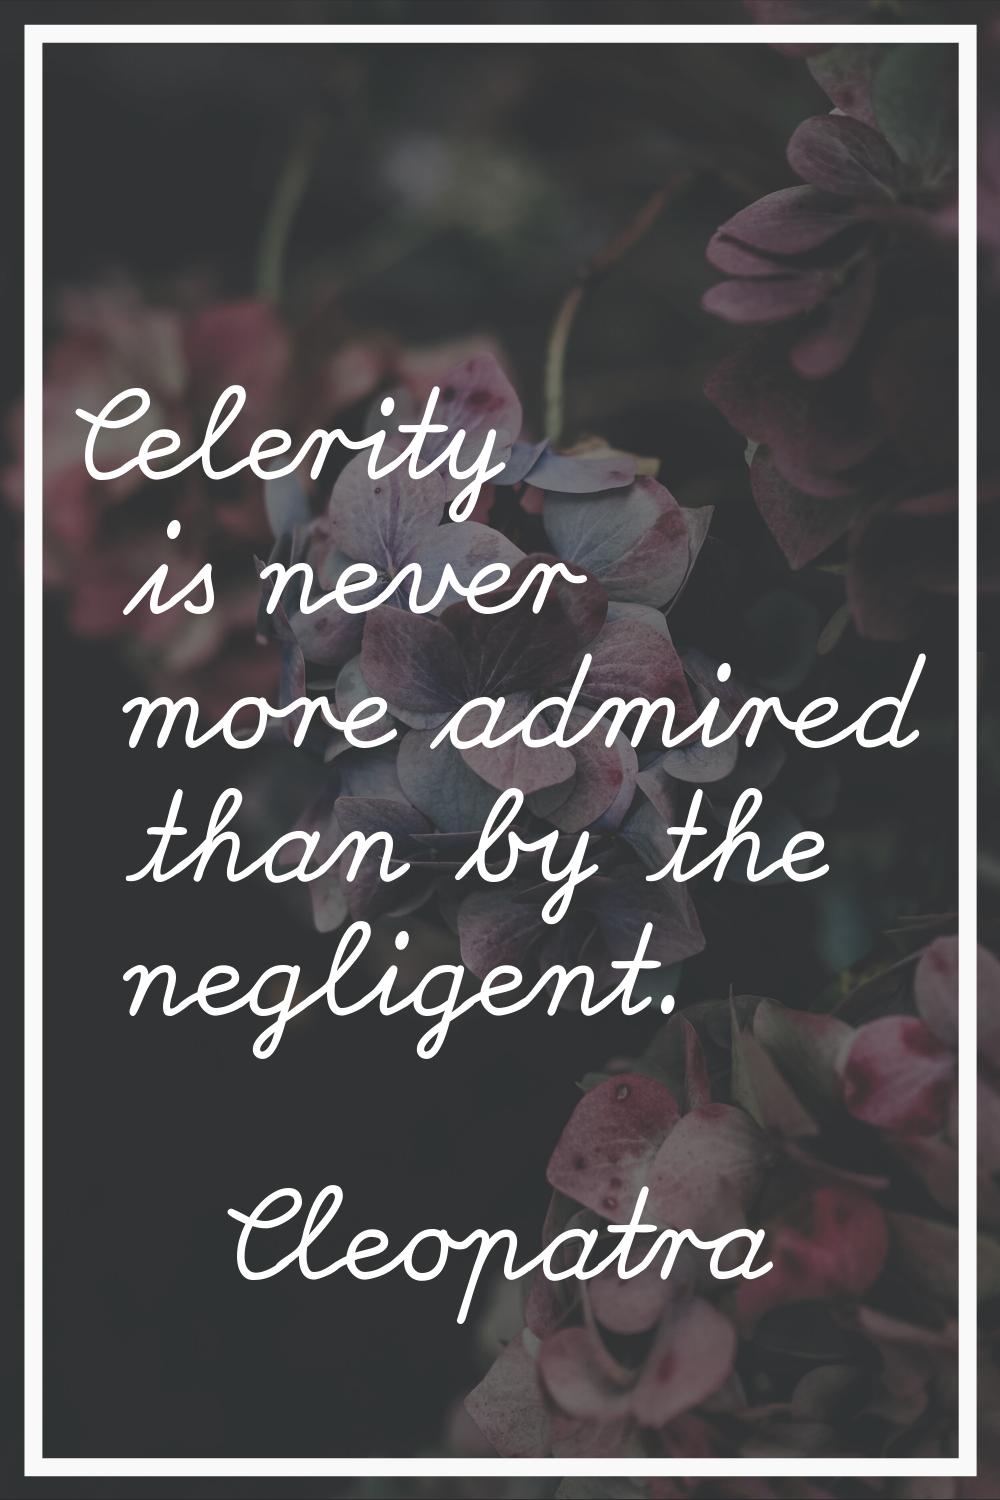 Celerity is never more admired than by the negligent.